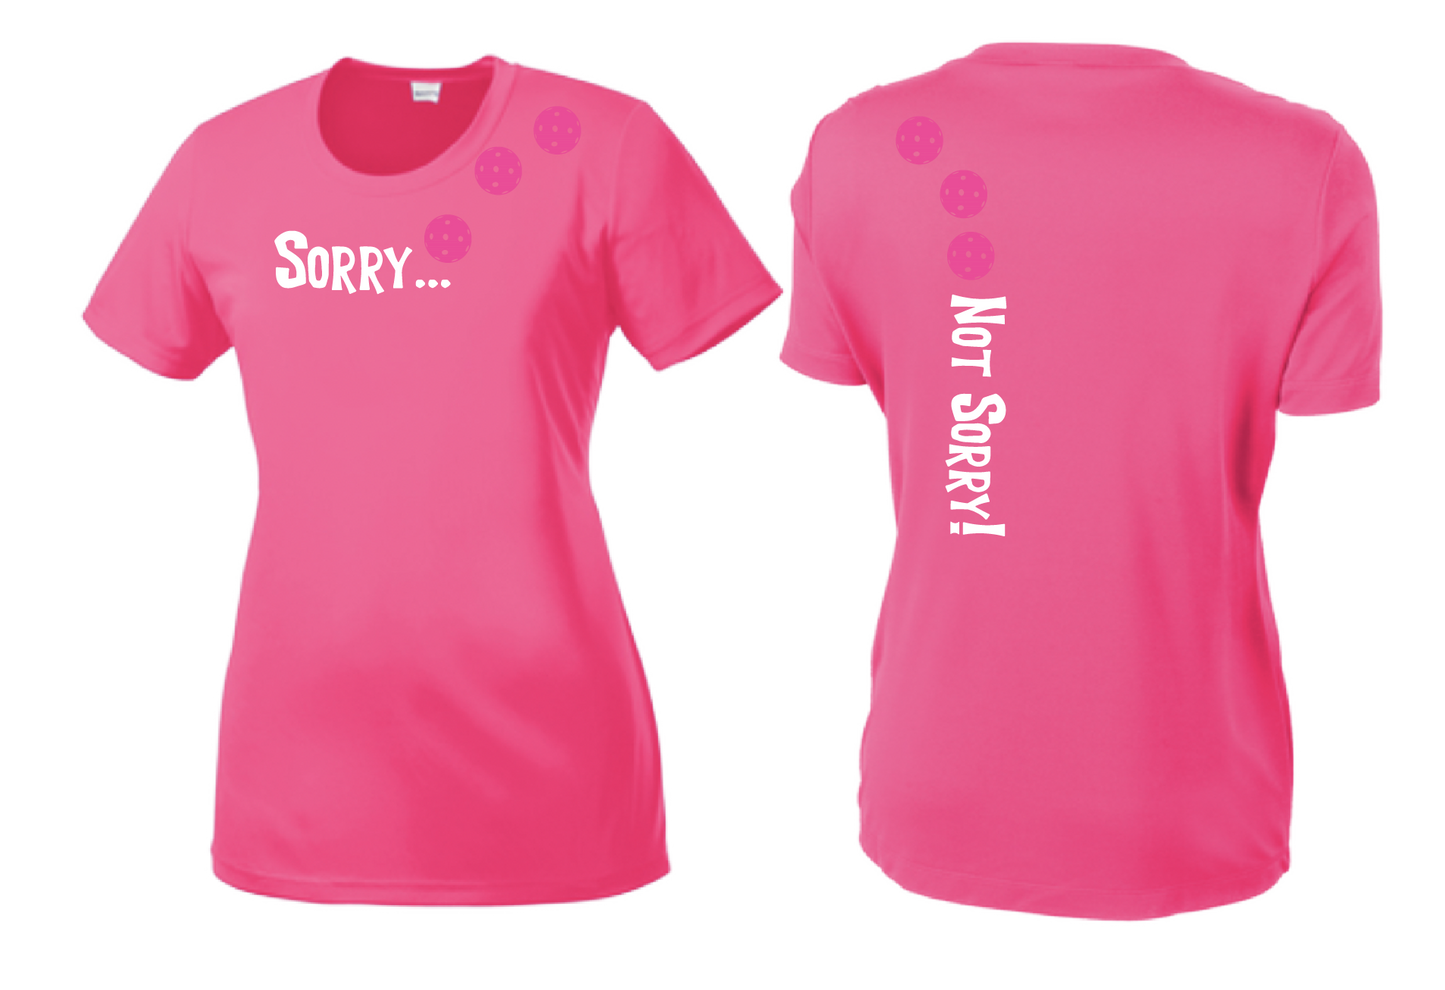 Pickleball Design: Sorry...Not Sorry with Customizable Ball Color - Choose: White, Yellow or Pink Women's Styles: Short-Sleeve Crew Neck Turn up the volume in this Women's shirt with its perfect mix of softness and attitude. Material is ultra-comfortable with moisture wicking properties and tri-blend softness. PosiCharge technology locks in color. Highly breathable and lightweight.